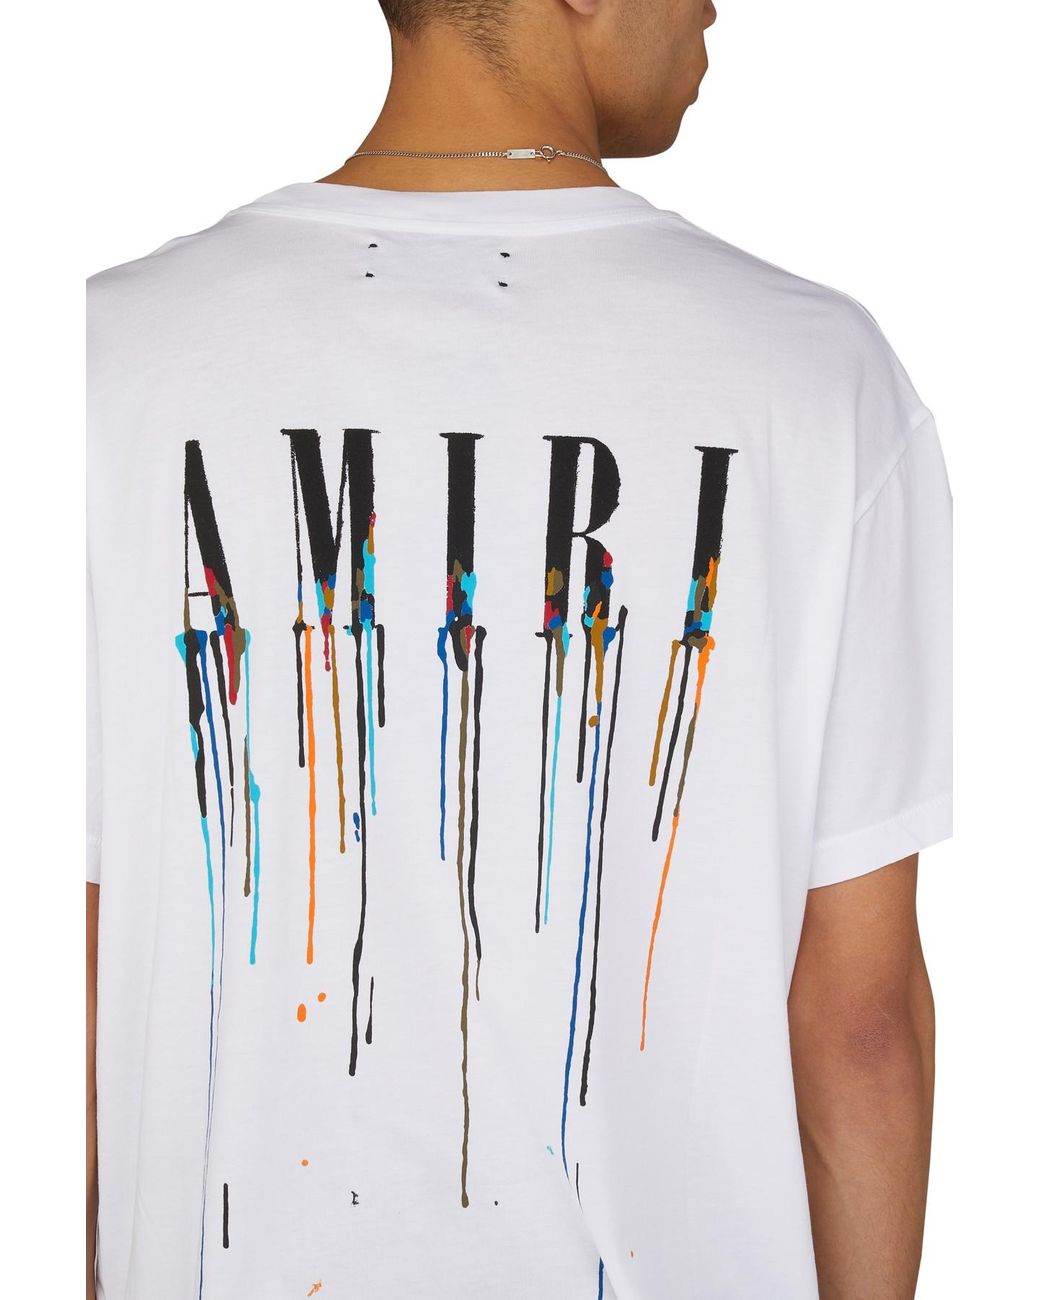 Amiri Paint Drip on White shirt T-Shirt Mens Size M- New with Tags